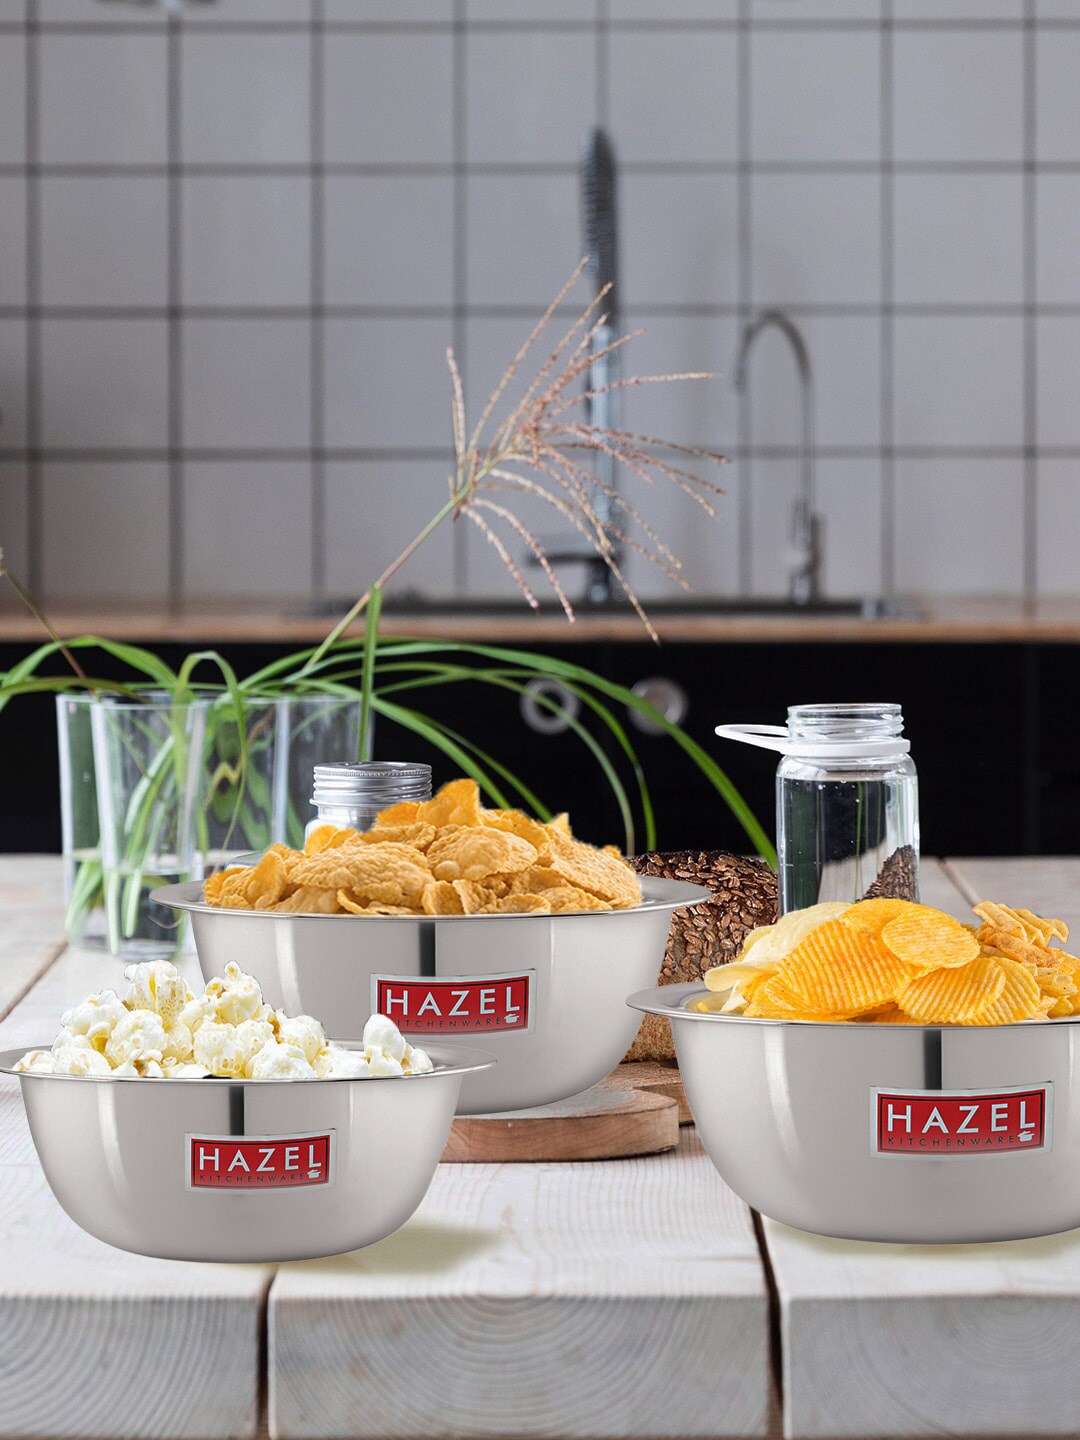 HAZEL 3Pc Stainless Steel Mixing Bowl Price in India